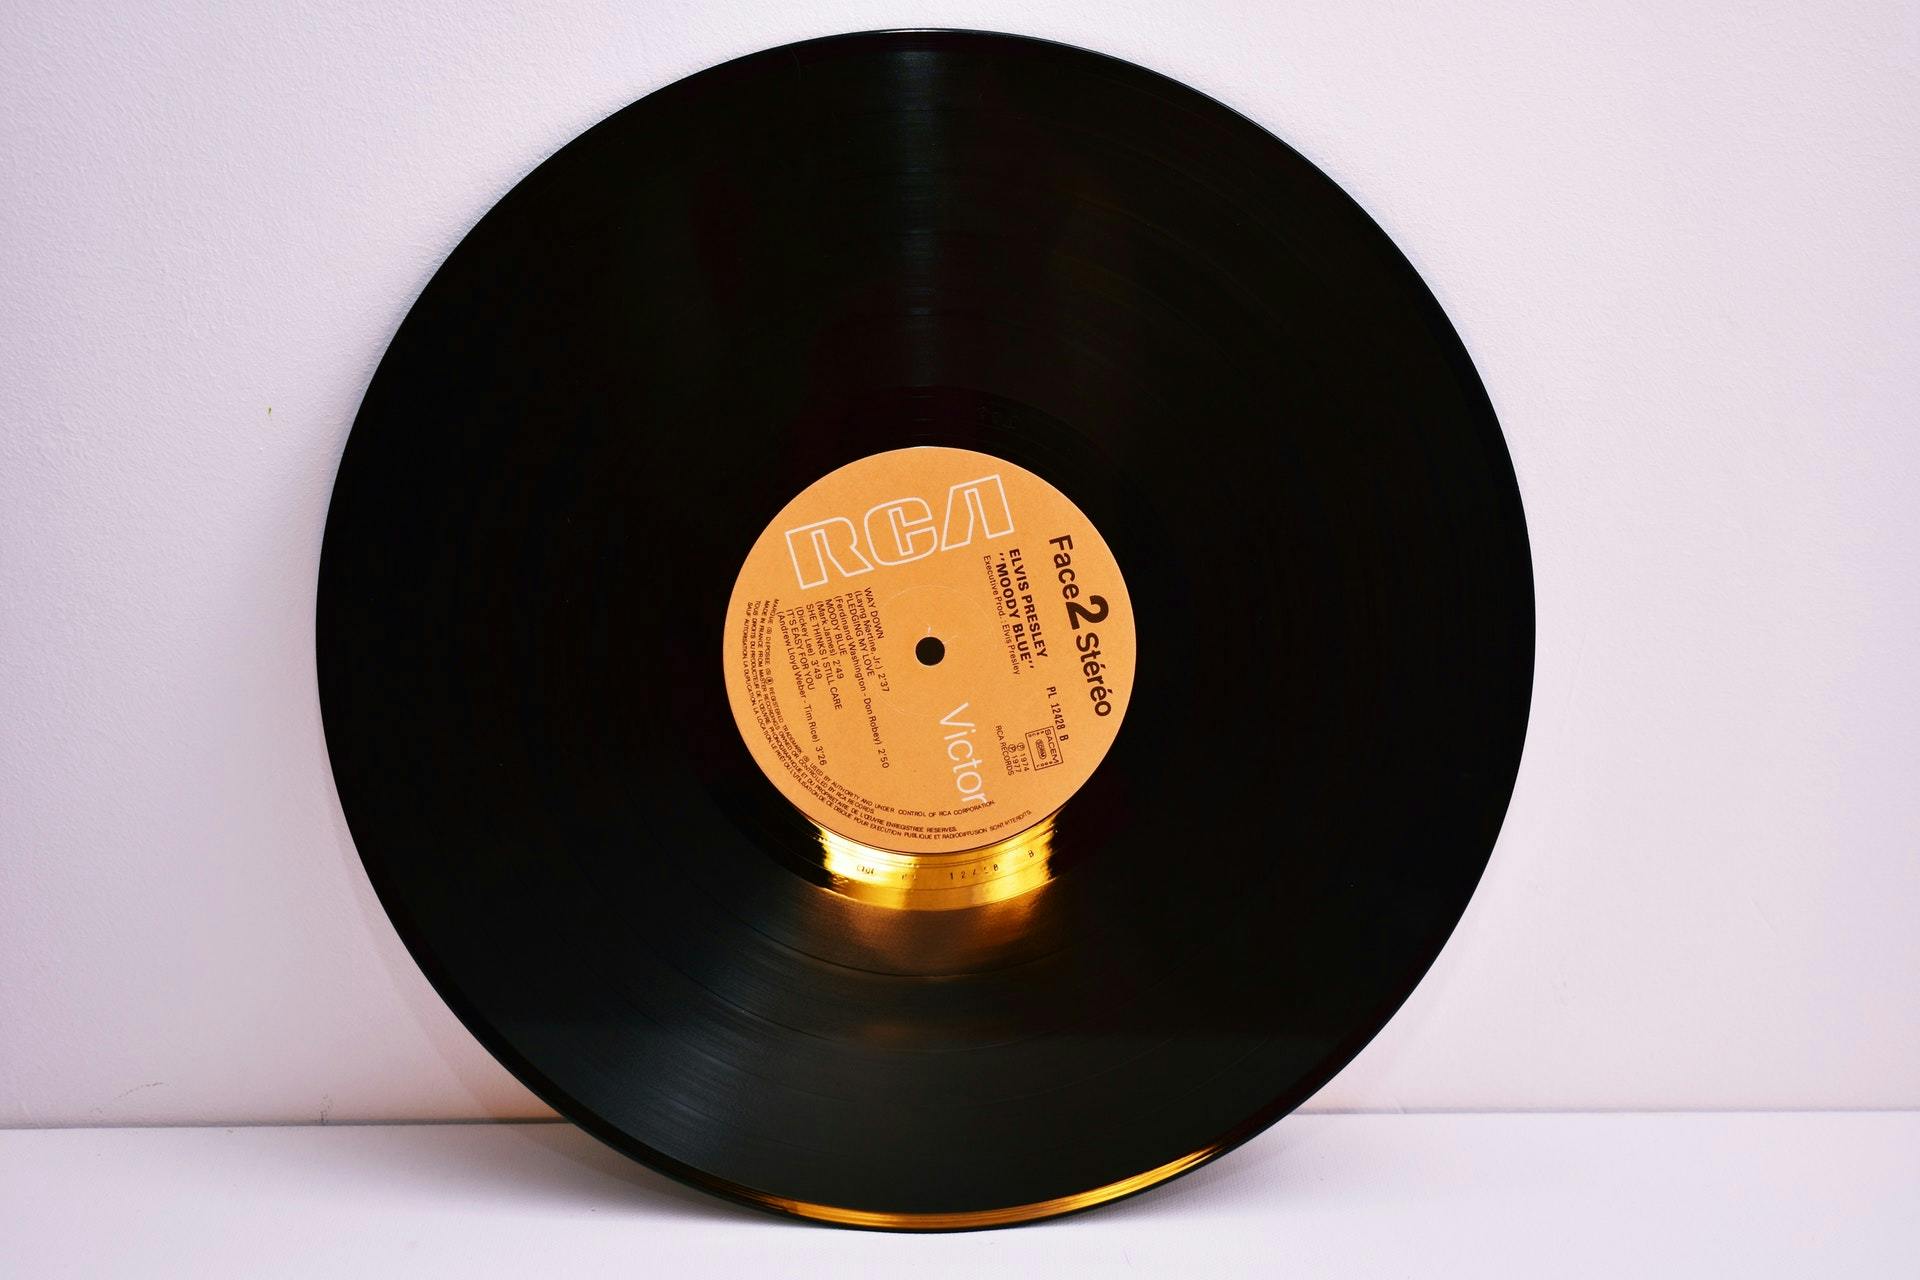 Why music artists are choosing vinyl records for their albums